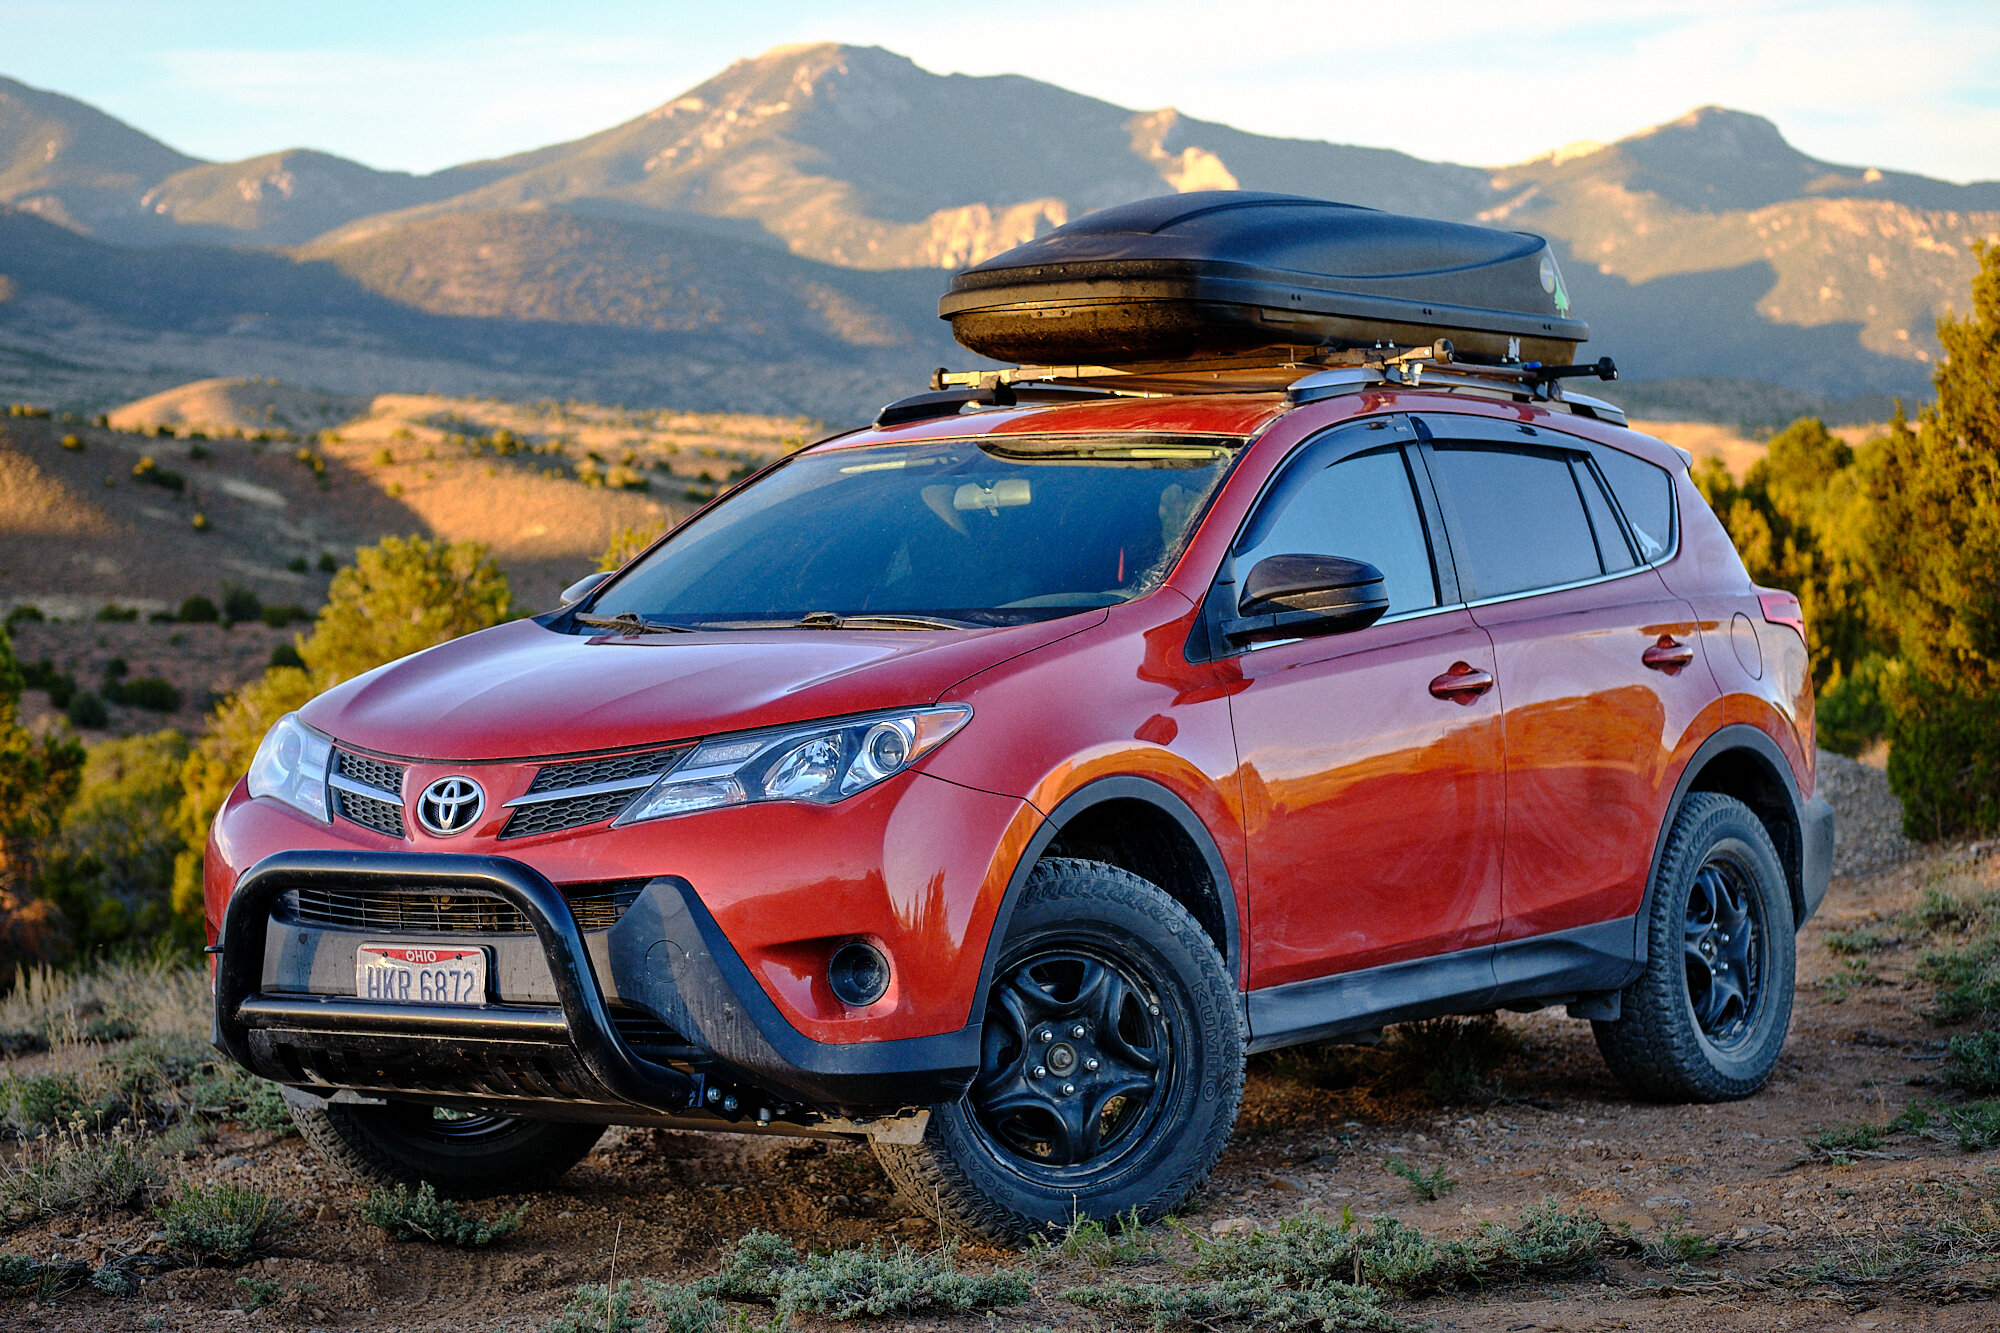  At long last, I customized my RAV4 to be both a living space and a halfway serious off-road machine. Exterior upgrades were made to suspension, ride height, tires, front end protection and a roof mounted sliding solar panel.  Click here  for the ful